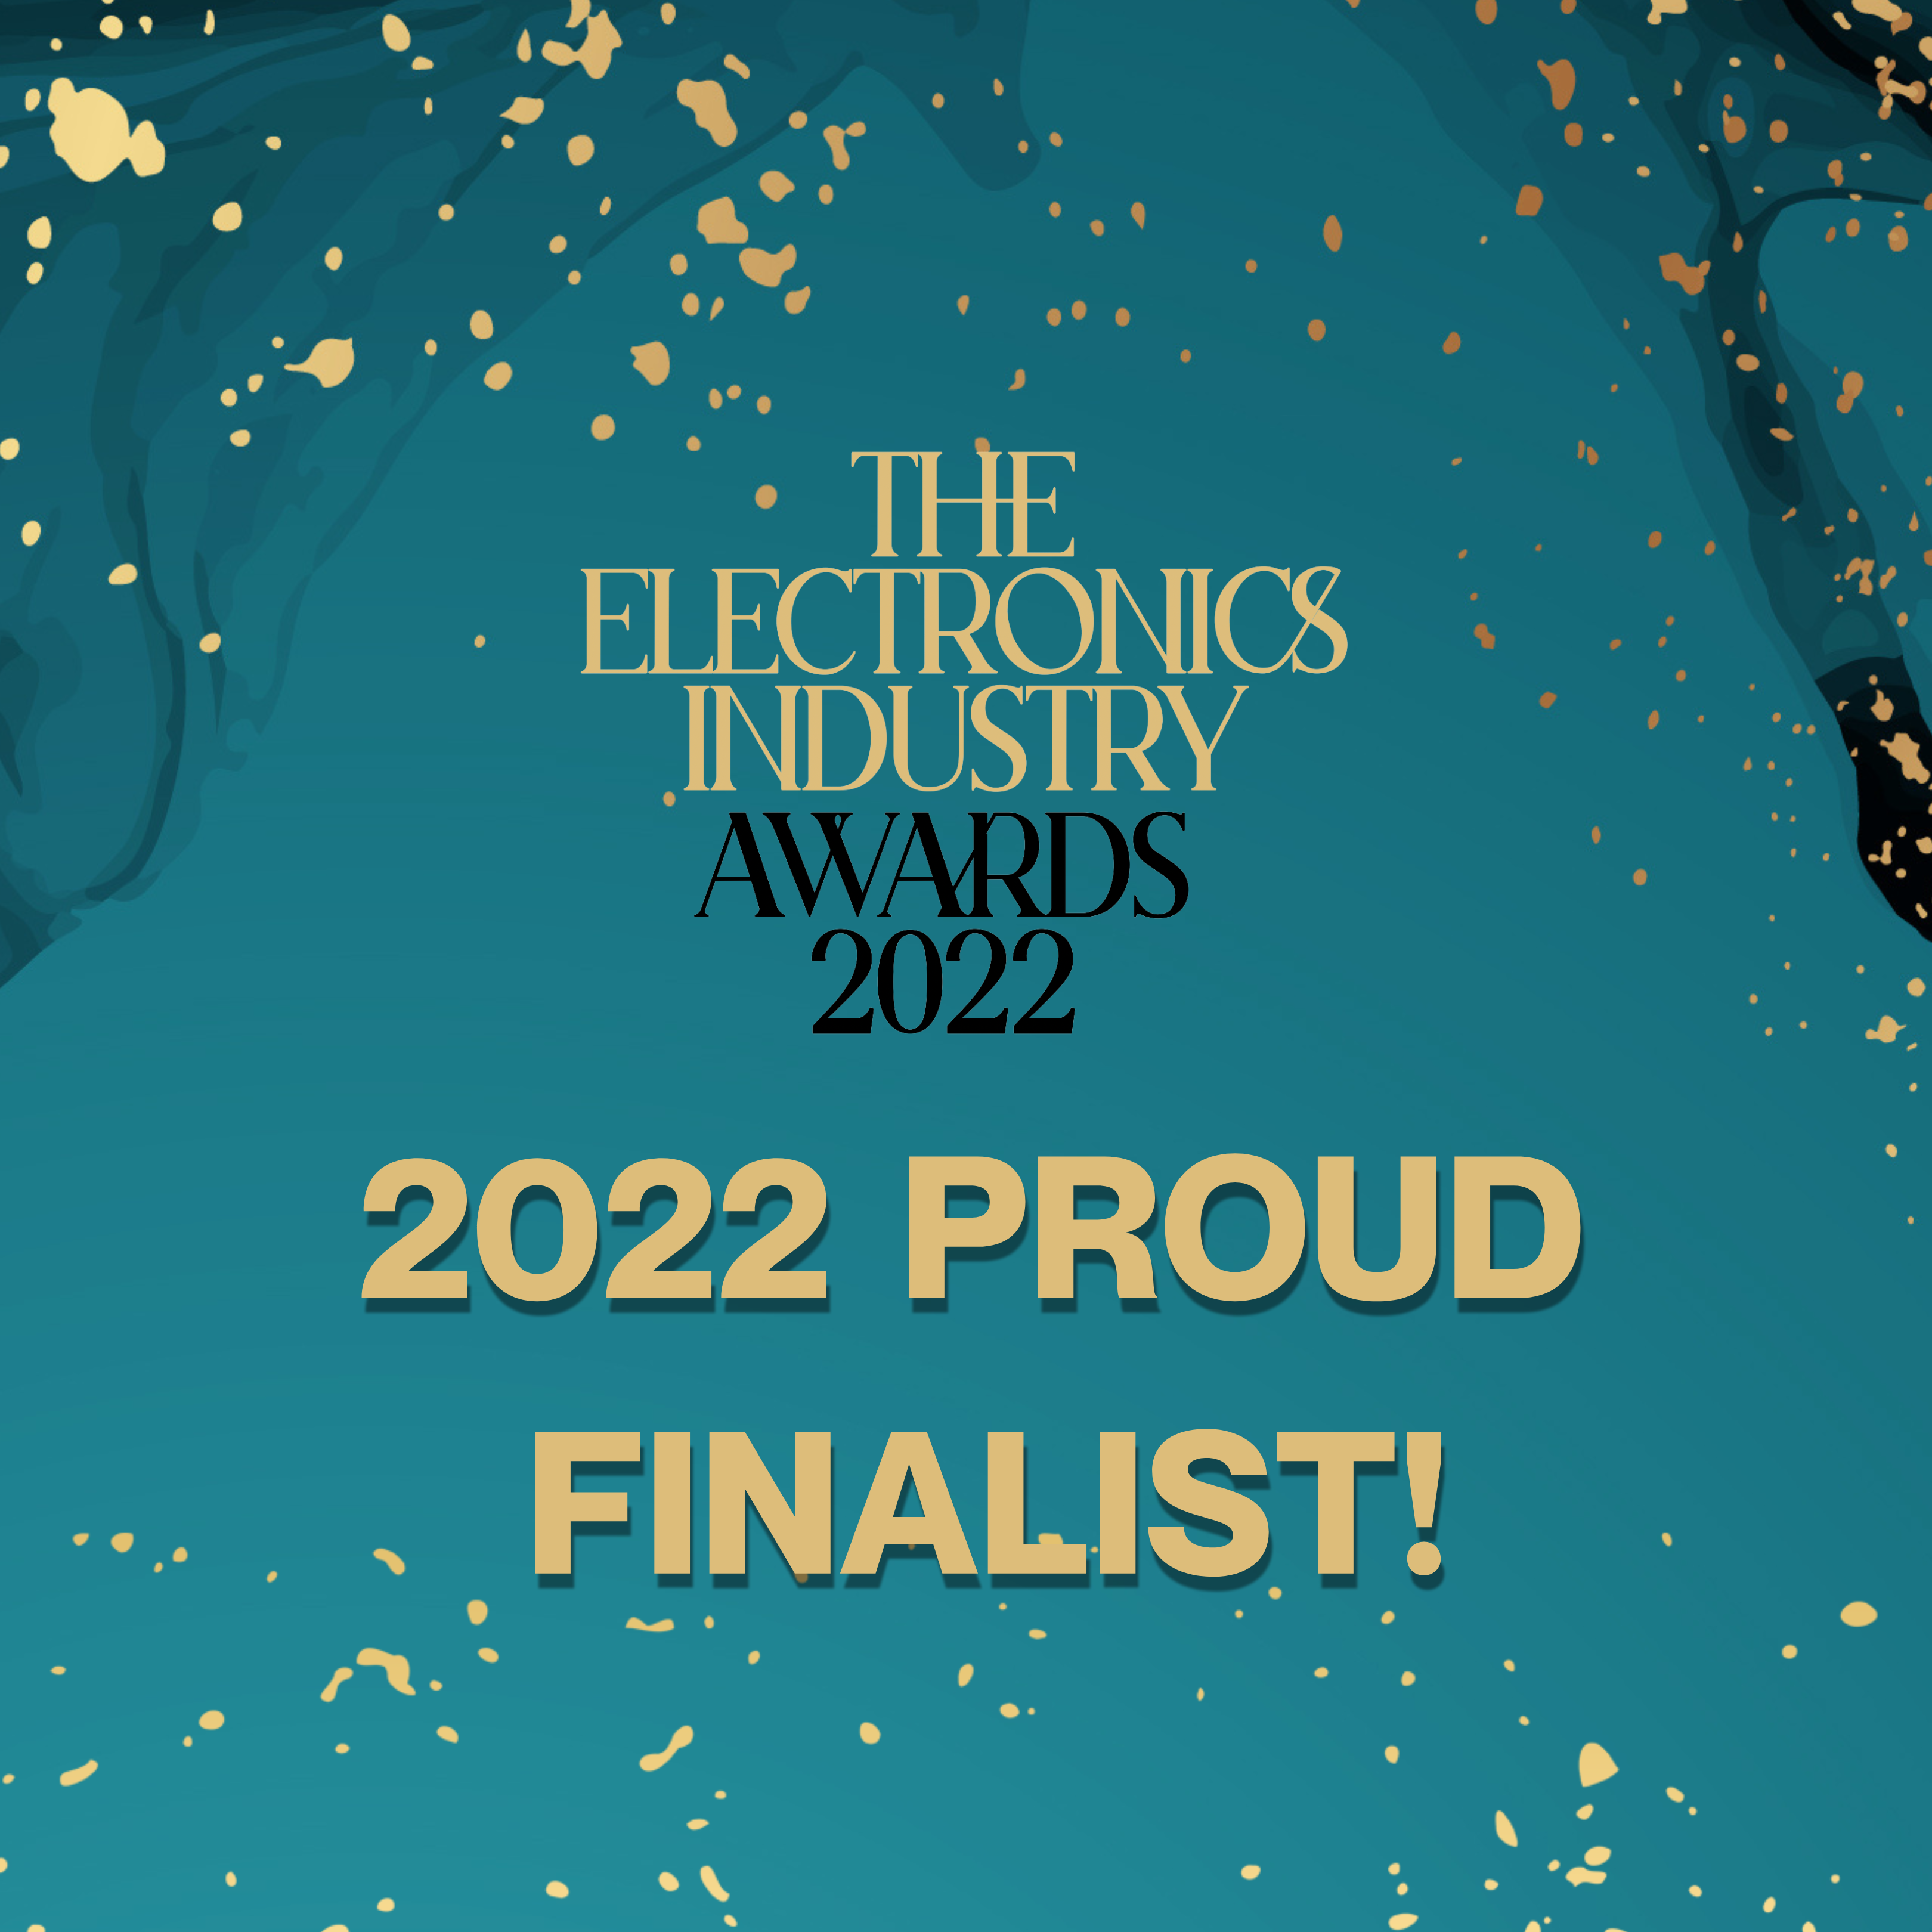 Red Pitaya is a finalist for Electronics Industry Awards